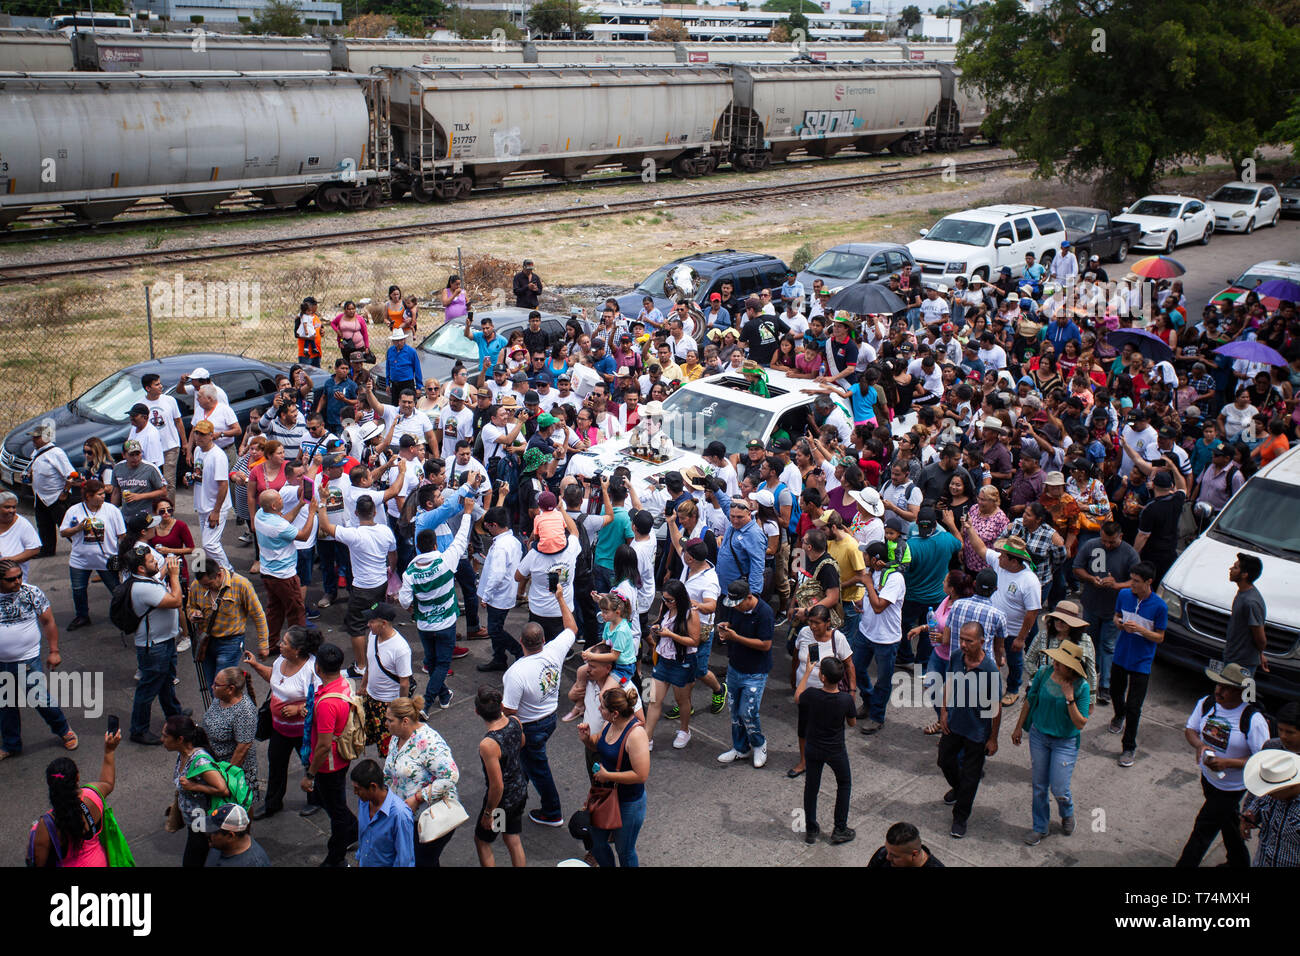 Culiacan, Mexico. 03rd May, 2019. Followers of Jesus Malverde, who is considered a saint of drug bosses in Mexico, take part in a procession. On the occasion of his 110th anniversary of death on 03.05.2019 numerous faithful gathered in his native town in the federal state of Sinaloa. Malverde, who is not recognized as a saint by the Catholic Church, is said to have been a highwayman during his lifetime. Many Mexicans worship him as a kind of Robin Hood. According to oral tradition, he robbed the rich families in the Sinaloa region and then distributed the booty among the poor. Credit: dpa pict Stock Photo